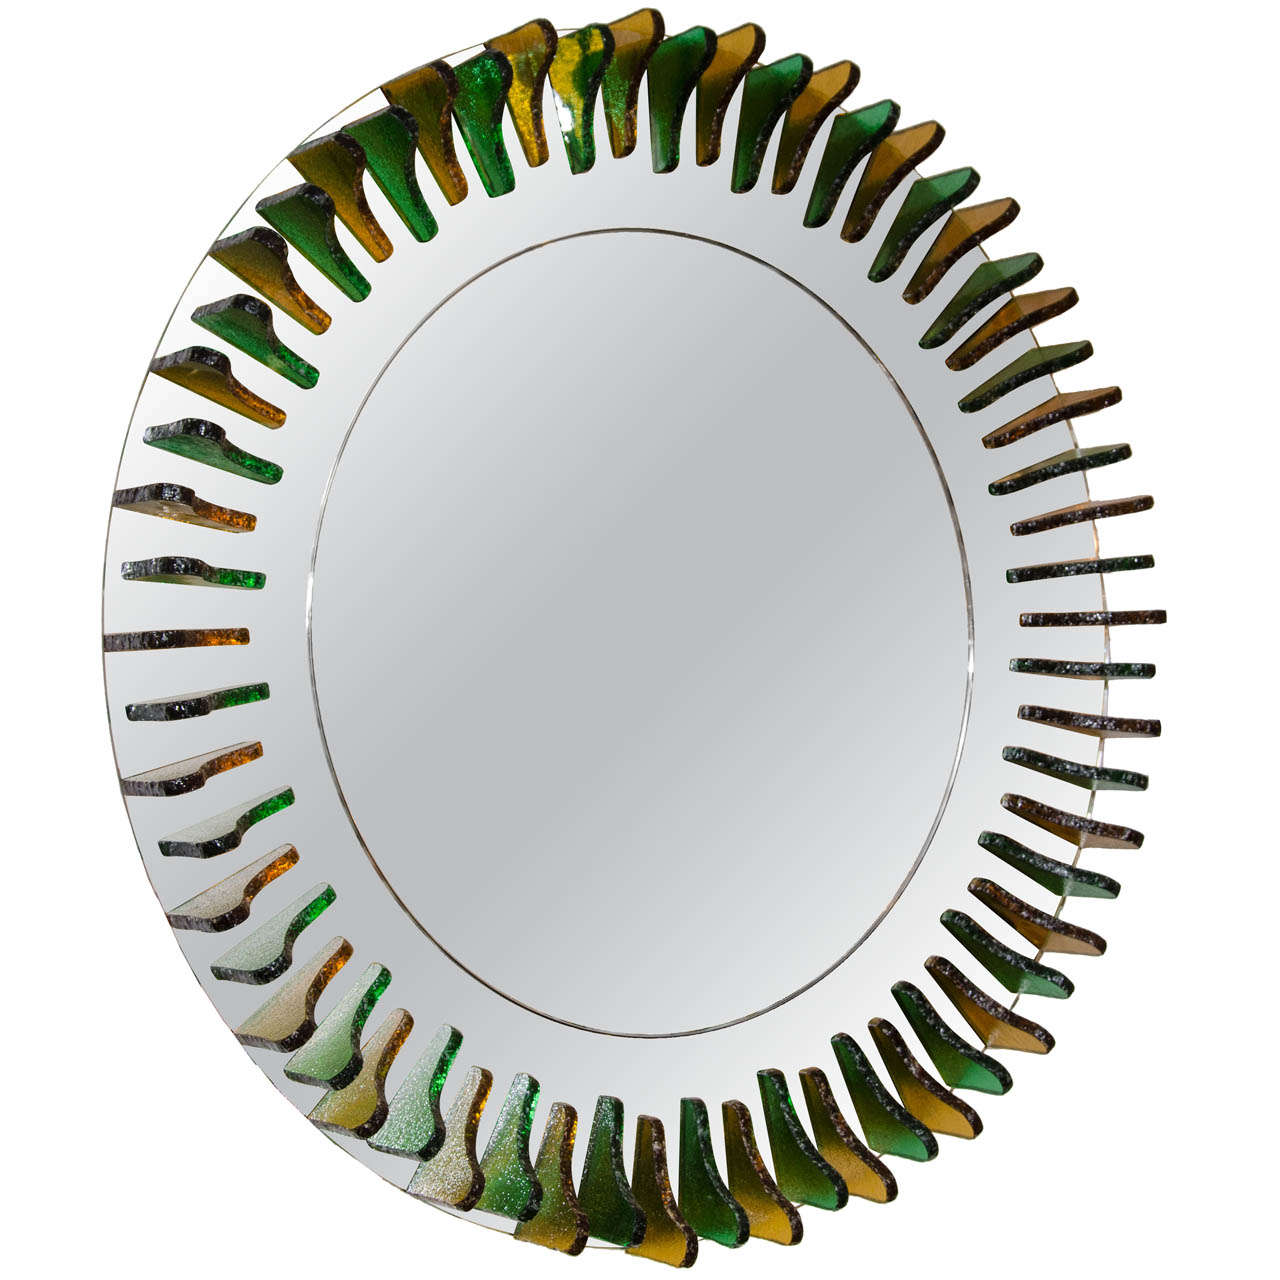 Green and Amber Glass Girasole Style Mirror